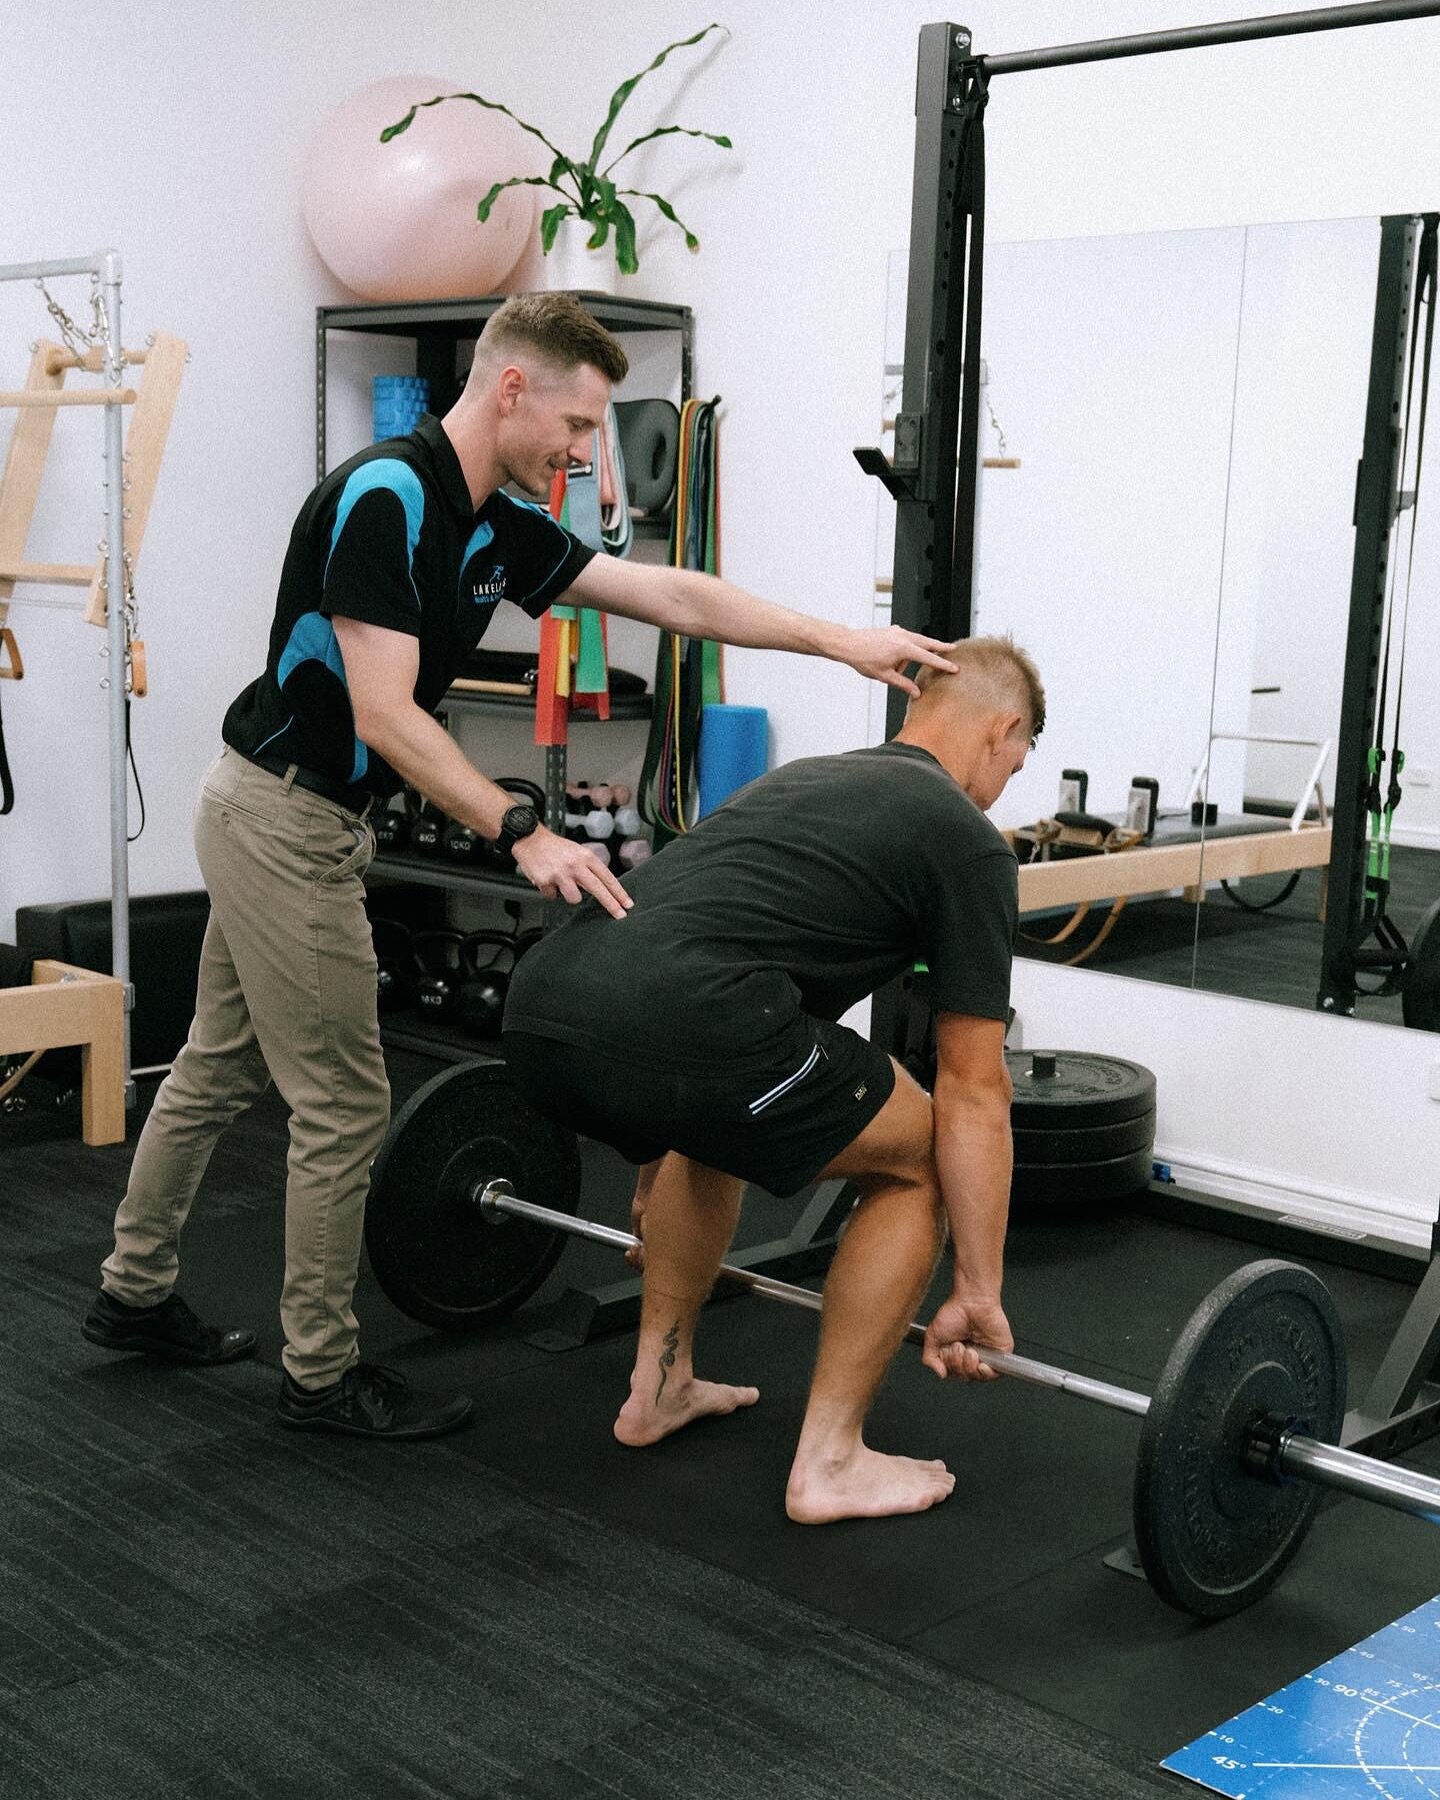 🤔Are you apprehensive about returning to activity after an injury?

😕Or confused about which movements are safe as you recover?

At LHP we love guiding people back to full function and helping them restore confidence in their body.

Call the practi